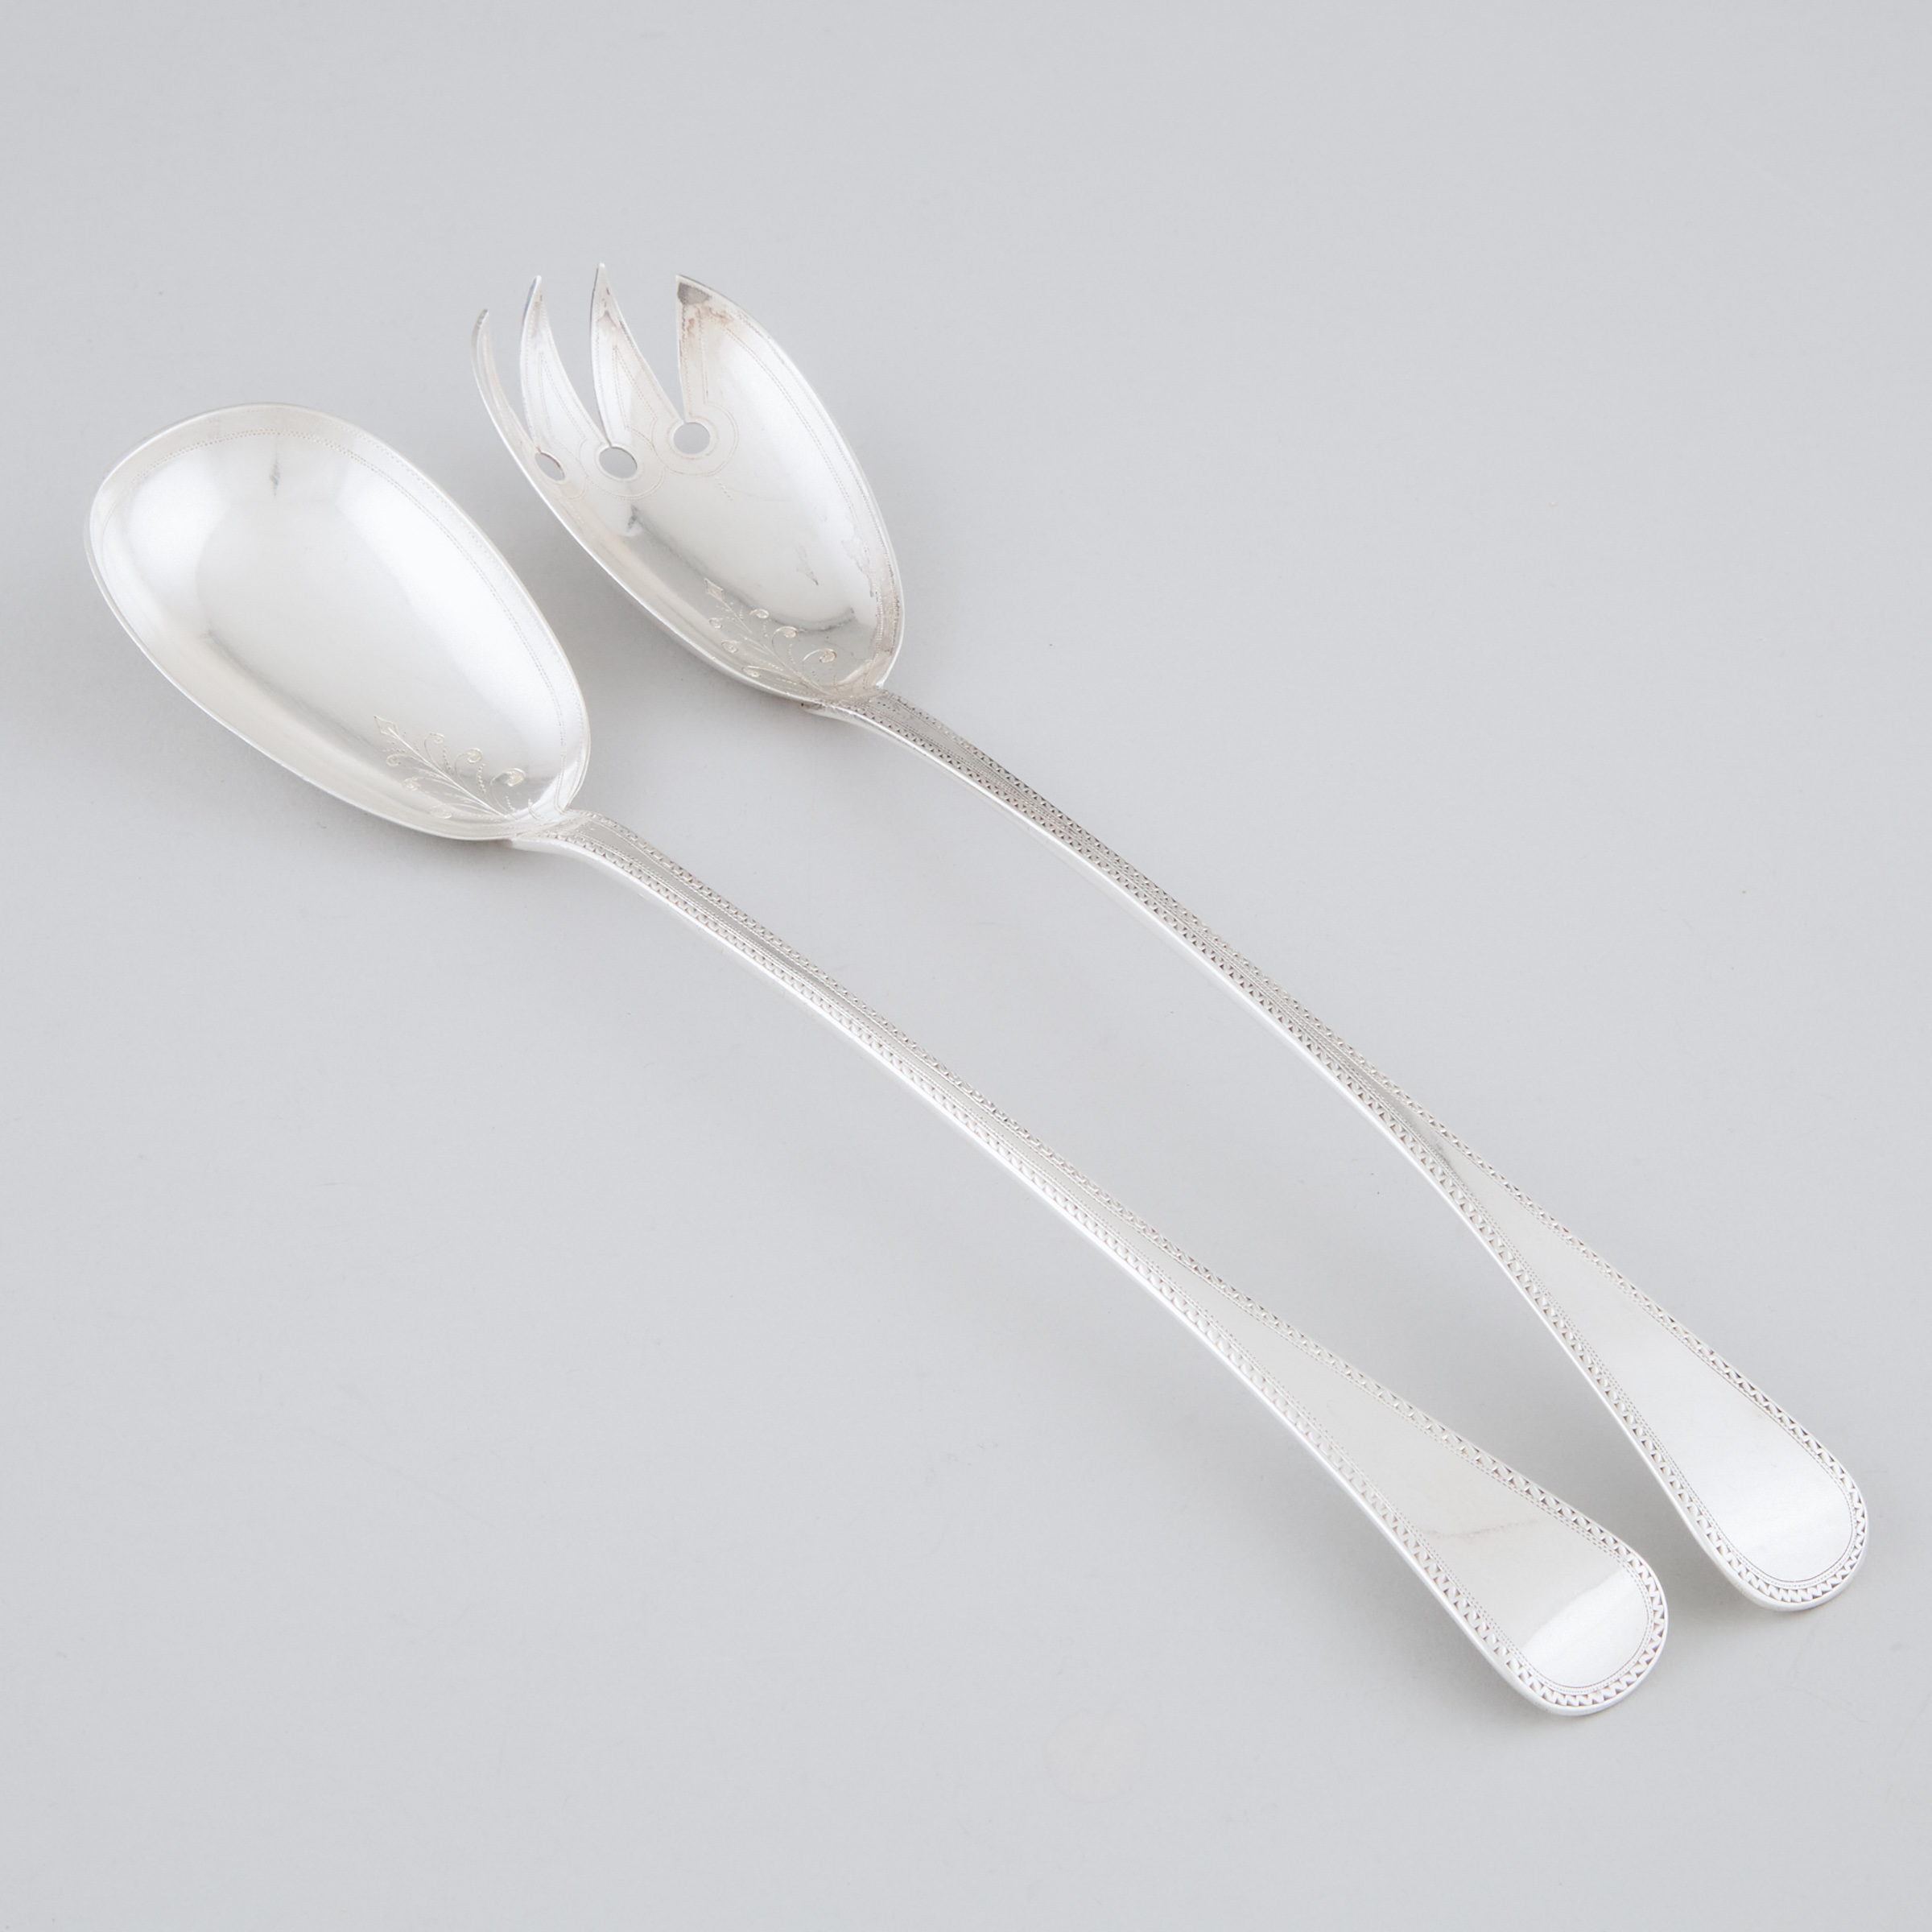 Pair of George III Silver Engraved Old English Pattern Salad Servers, William Eley & William Fearn, London, 1814